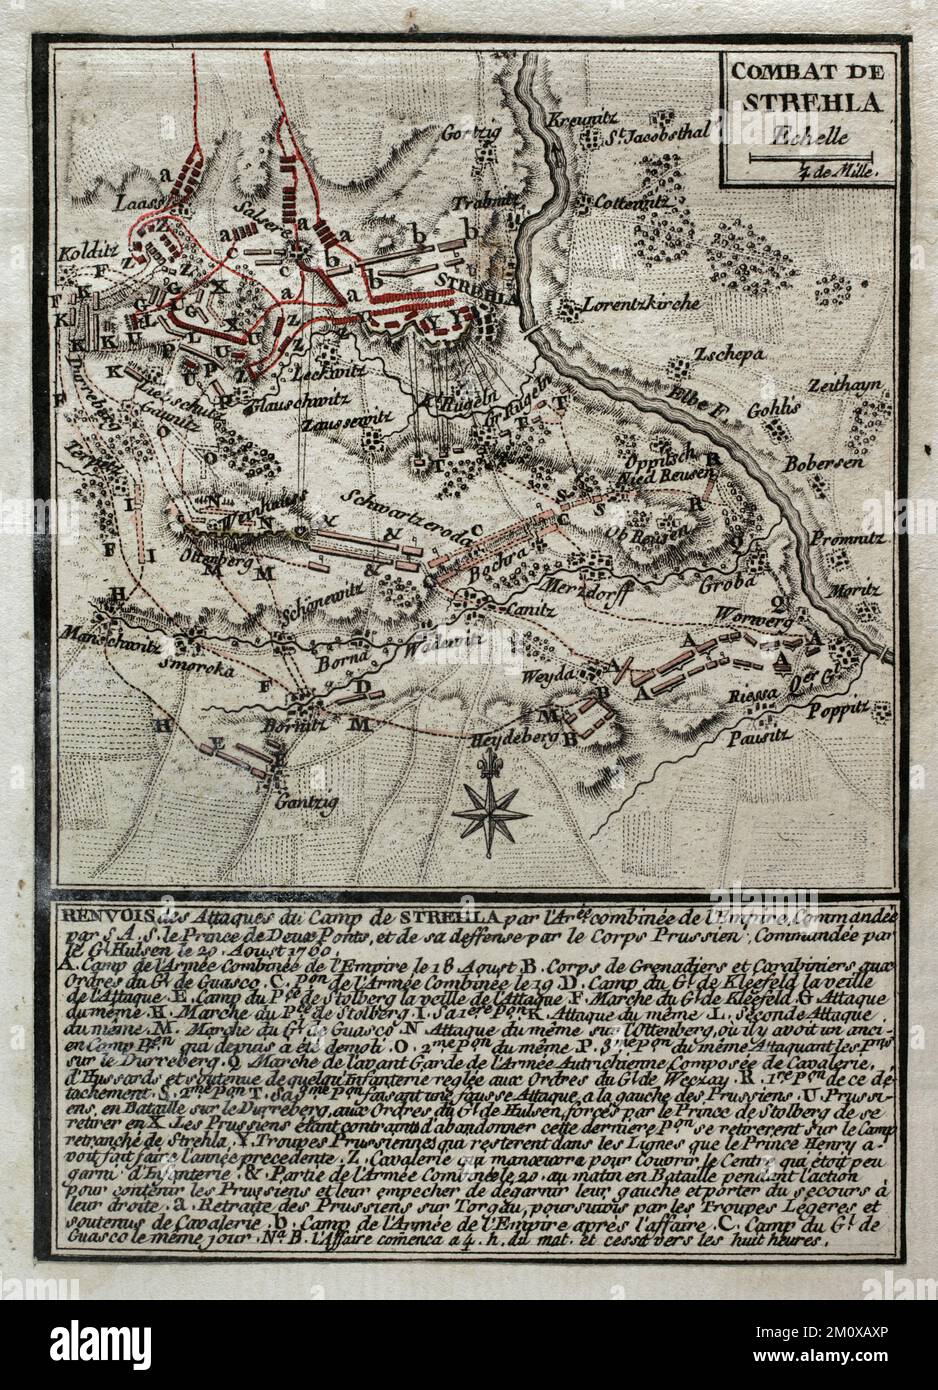 Seven Years War (1756-1763). Third Silesian War. Map of the Battle of Strehla (August 20, 1760). Saxony. The Prussian army, commanded by Johann Dietrich von Hulsen, attacked the Austrian lines defended by troops led by Frederick Michael (Count Palatine of Zweibrucken). The Prussians succeeded in overcoming the Austrians. Published in 1765 by the cartographer Jean de Beaurain (1696-1771) as an illustration of his Great Map of Germany, with the events that took place during the Seven Years War. Etching and engraving. French edition, 1765. Military Historical Library of Barcelona (Biblioteca Hist Stock Photo